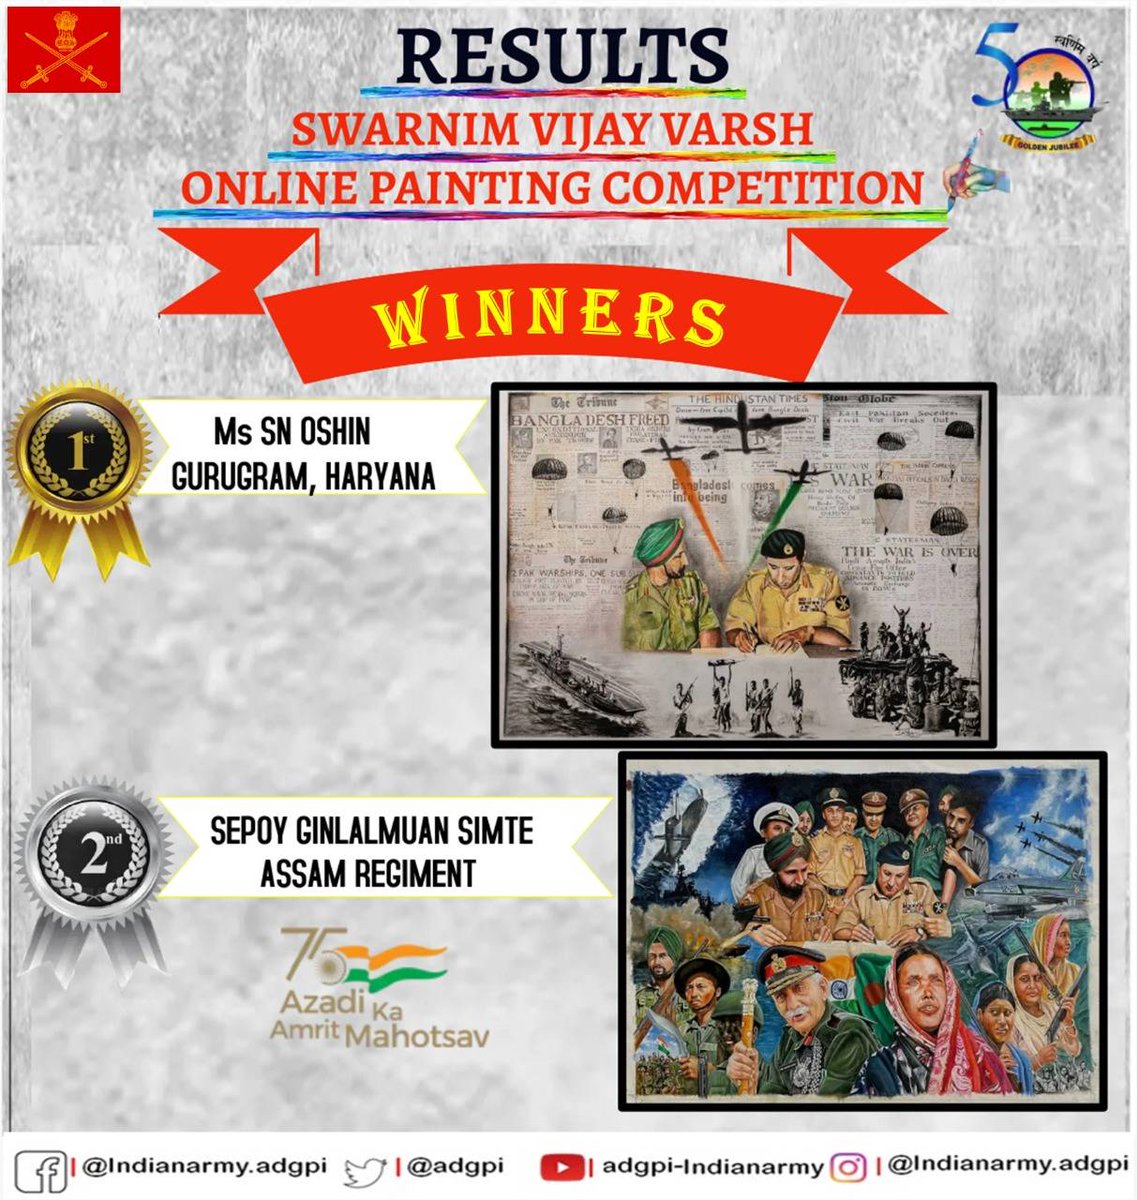 'RESULTS: ONLINE PAINTING COMPETITION'

#IndianArmy congratulates Ms SN Oshin from #Gurugram & Sepoy Ginlalmuan Simte of ASSAM Regiment on being adjudged as Winner and Runner-Up of #SwarnimVijayVarsh Online Painting Competition.

#IndianArmy
#AmritMahotsav